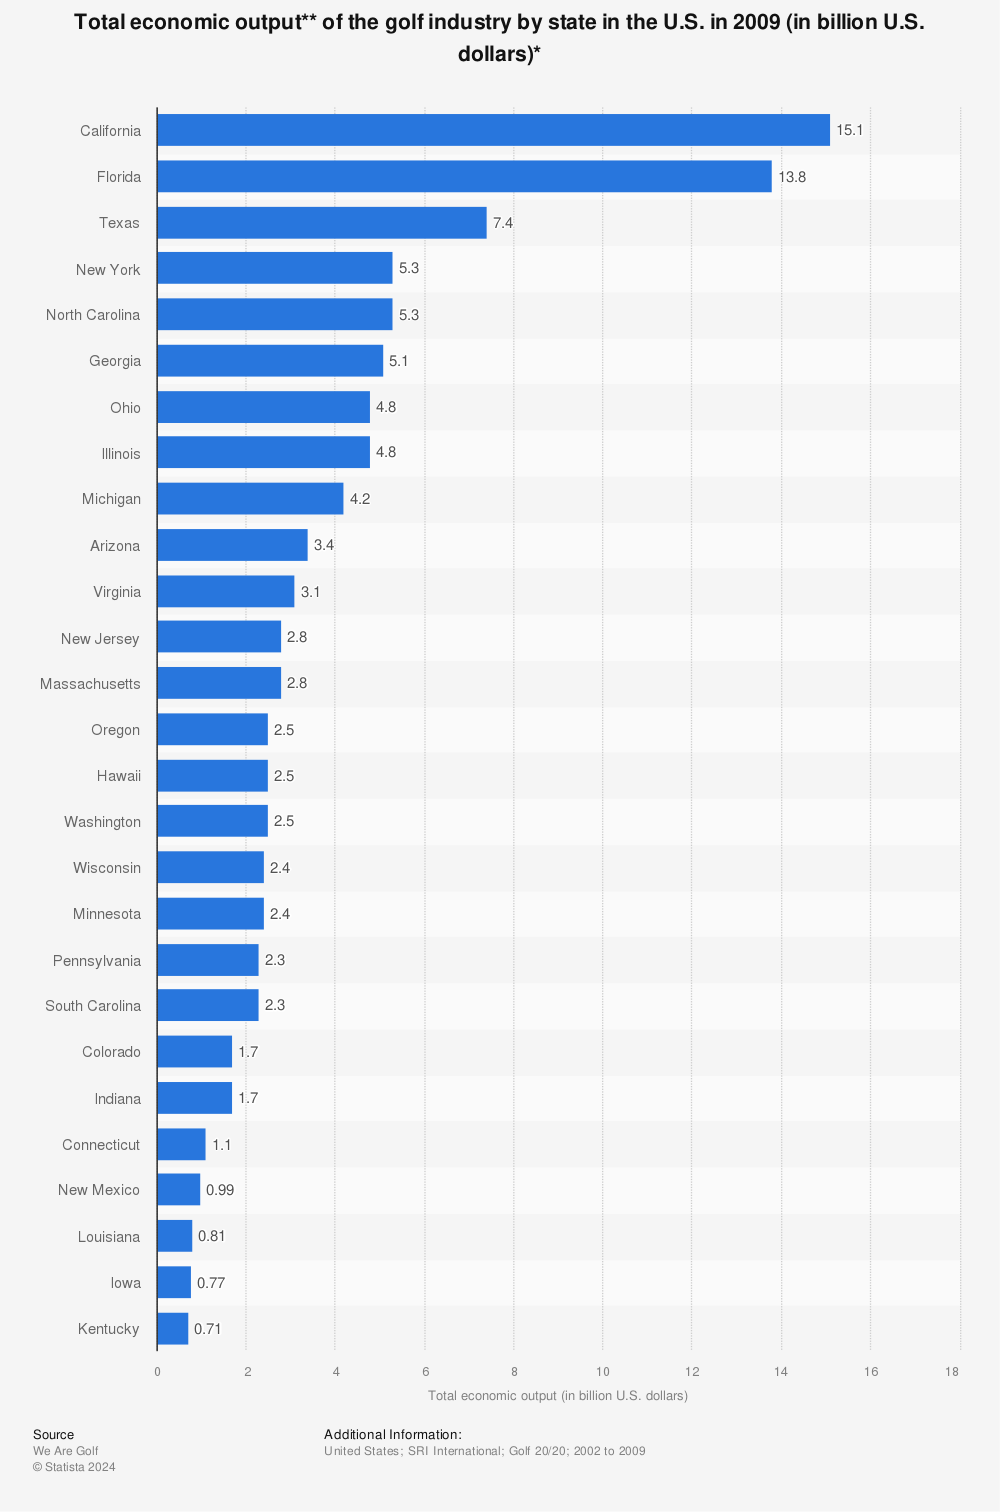 Statistic: Total economic output** of the golf industry by state in the U.S. in 2009 (in billion U.S. dollars)* | Statista